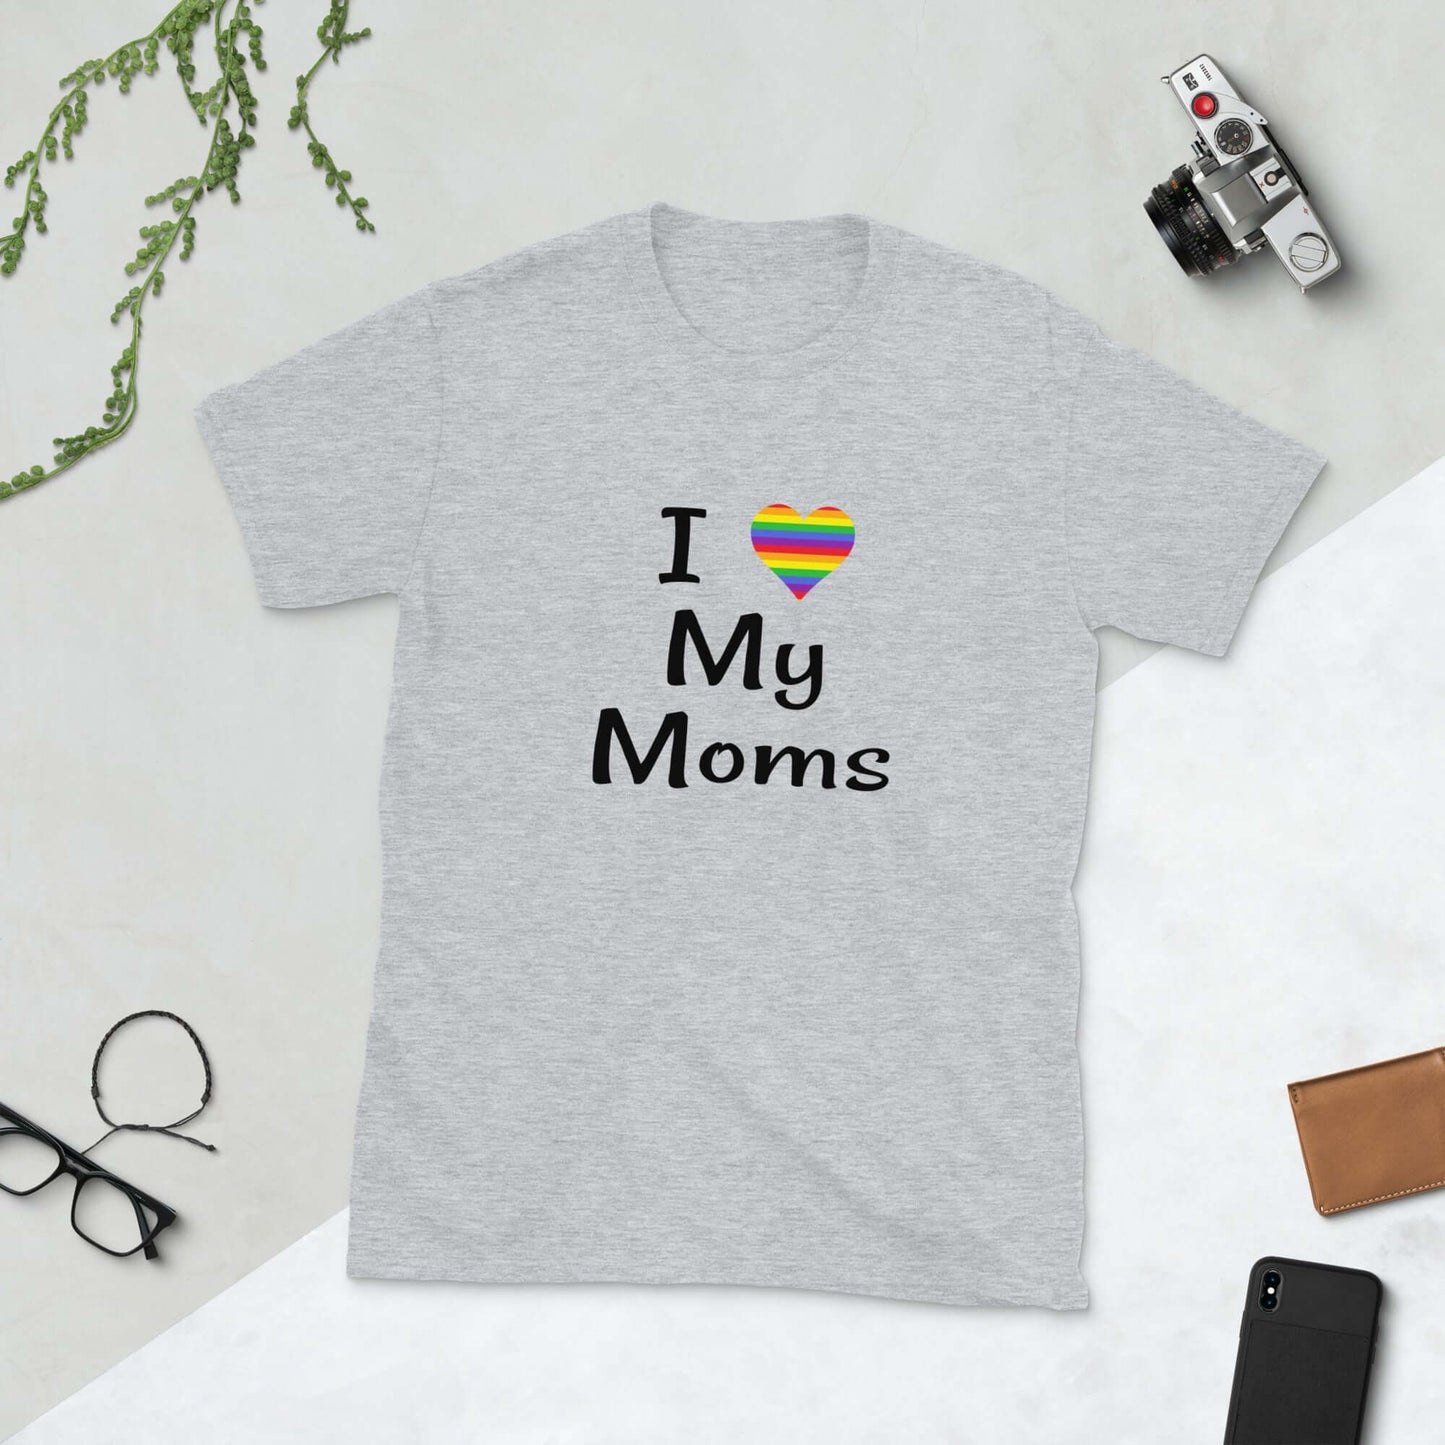 Light grey t-shirt with I heart my moms printed on the front. The heart is rainbow colors.